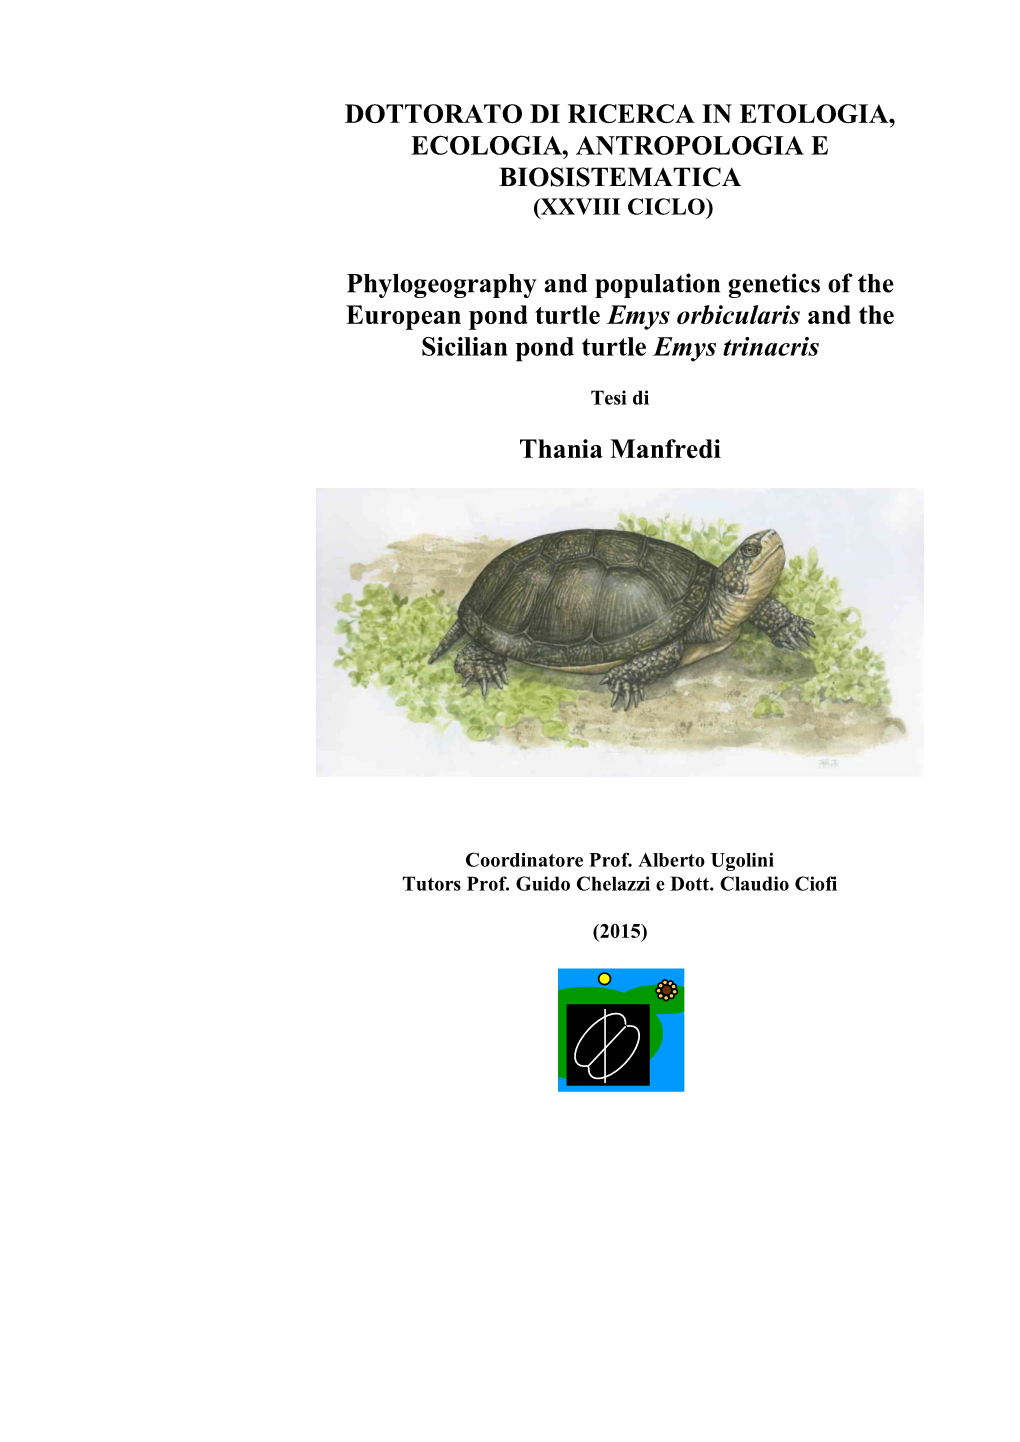 Phylogeography and Population Genetics of the European Pond Turtle Emys Orbicularis and the Sicilian Pond Turtle Emys Trinacris